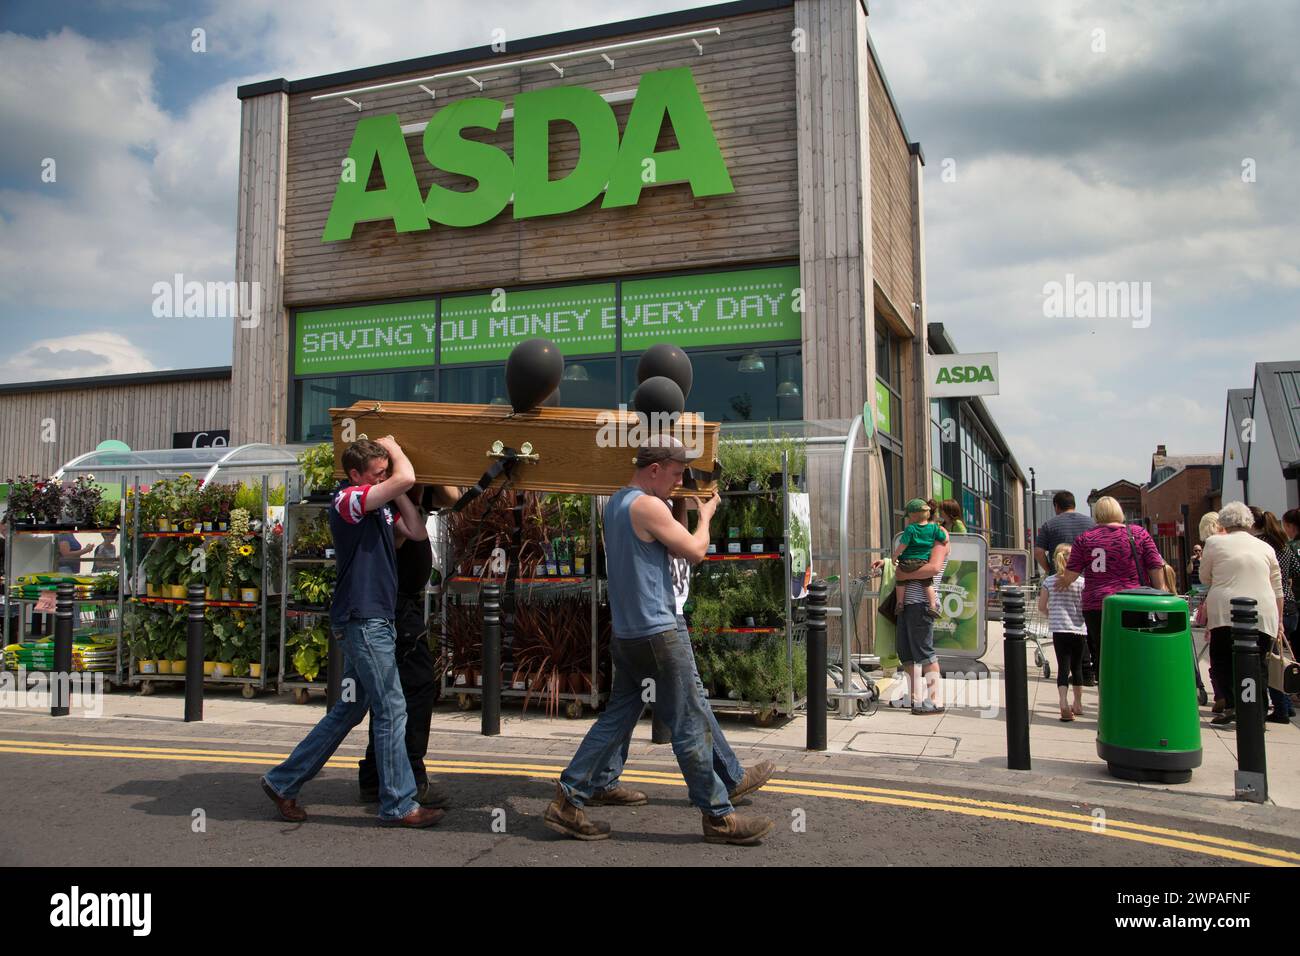 08/08/15  Full story here:  http://www.fstoppress.com/articles/milk protest uttoxeter/  Farmers and their families follow a coffin into Asda's Uttoxet Stock Photo